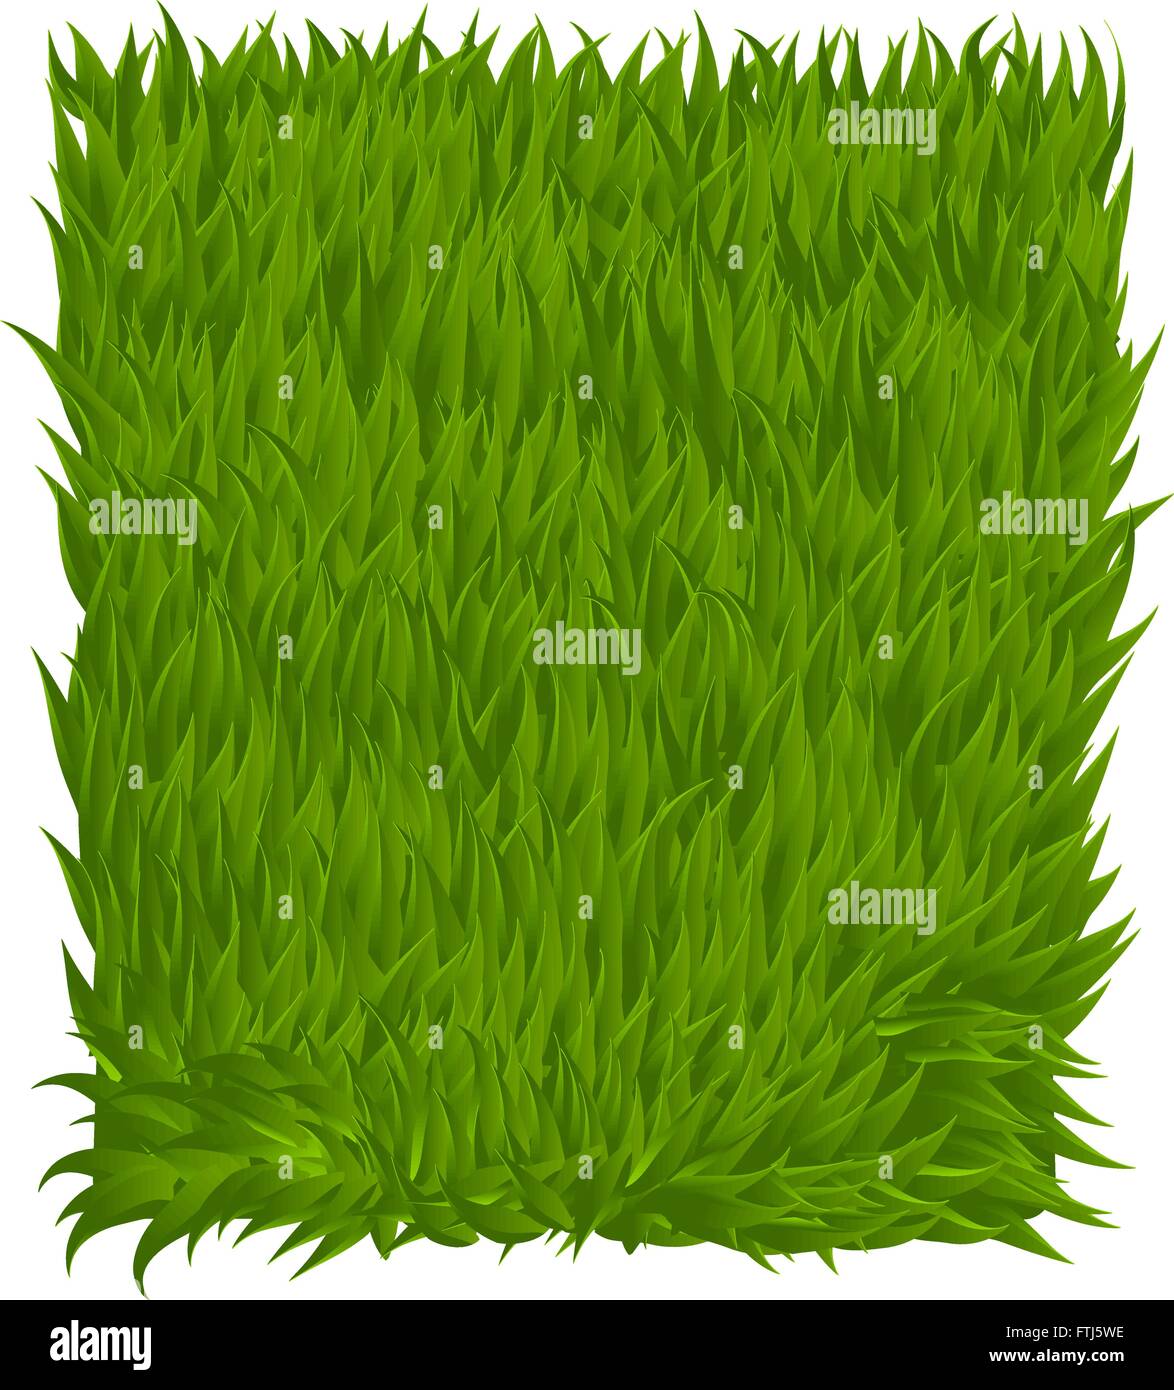 Green grass texture rectangle isolated on white. Vector illustration Stock Vector